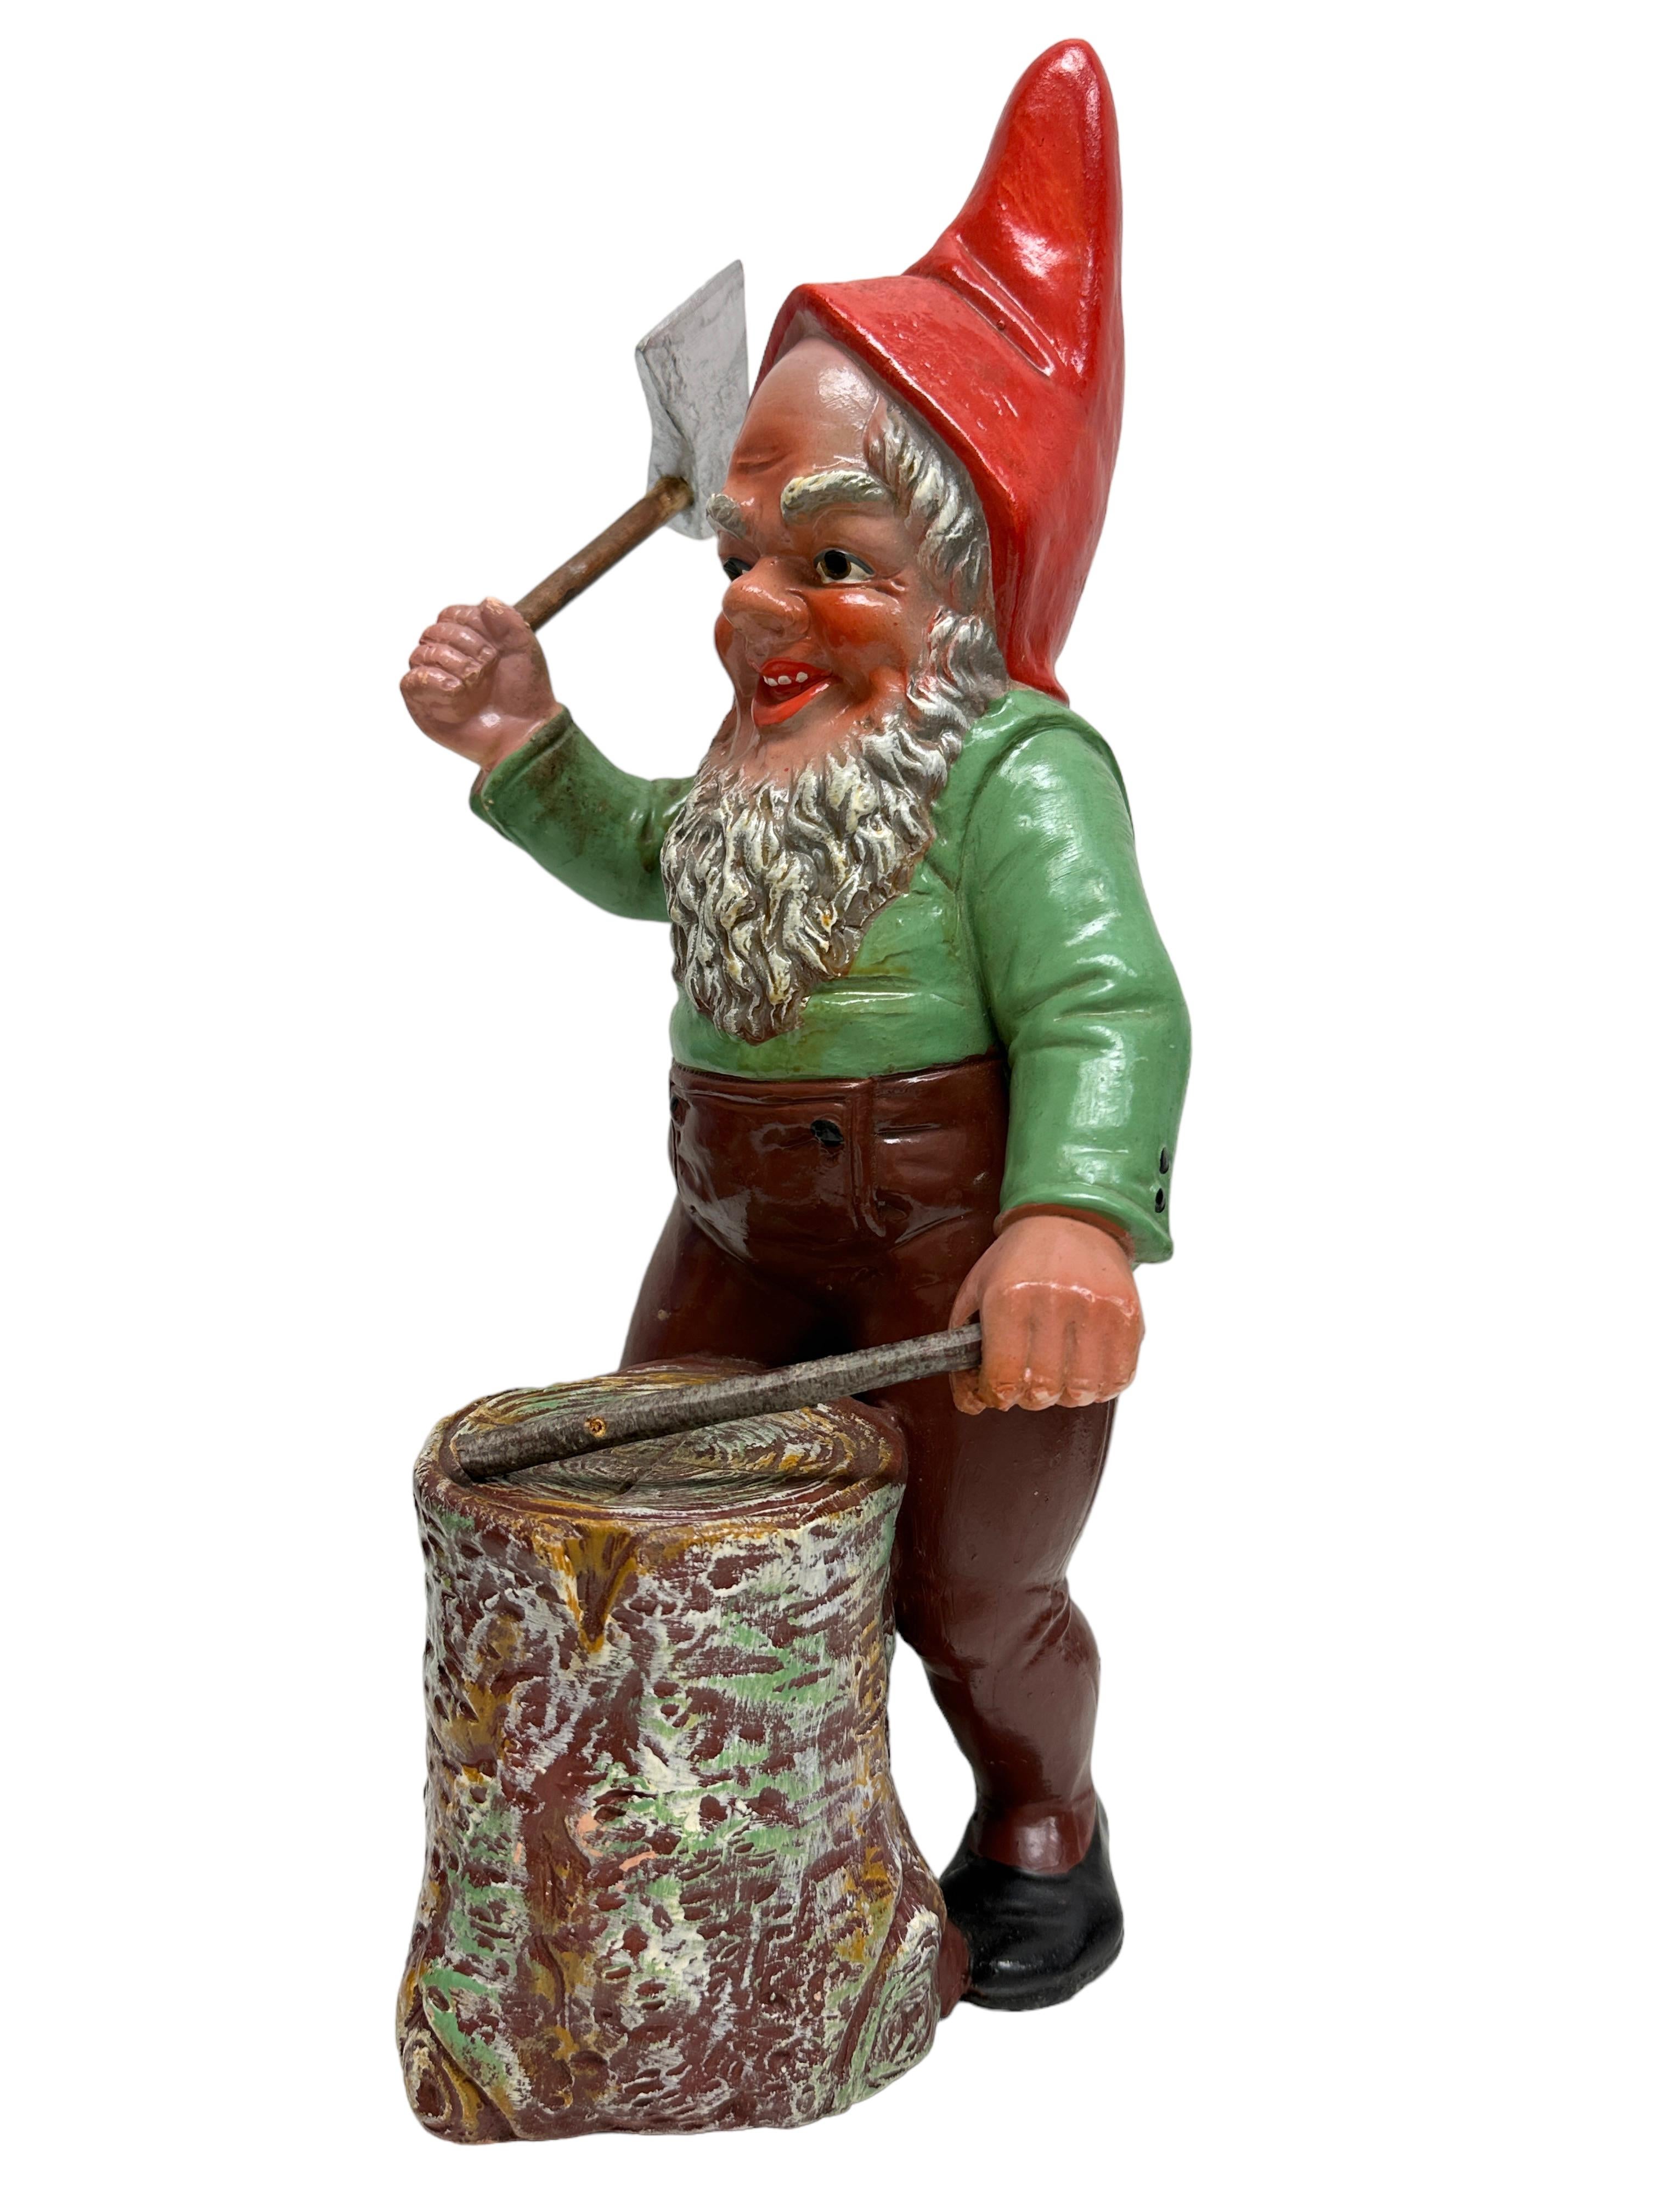 A gorgeous character ceramic figural gnome statue. This character statue has been made in Germany, in the 1910s or older. Absolutely gorgeous item with lots of character and still in good, used condition, without damage. Some paint lost, but this is